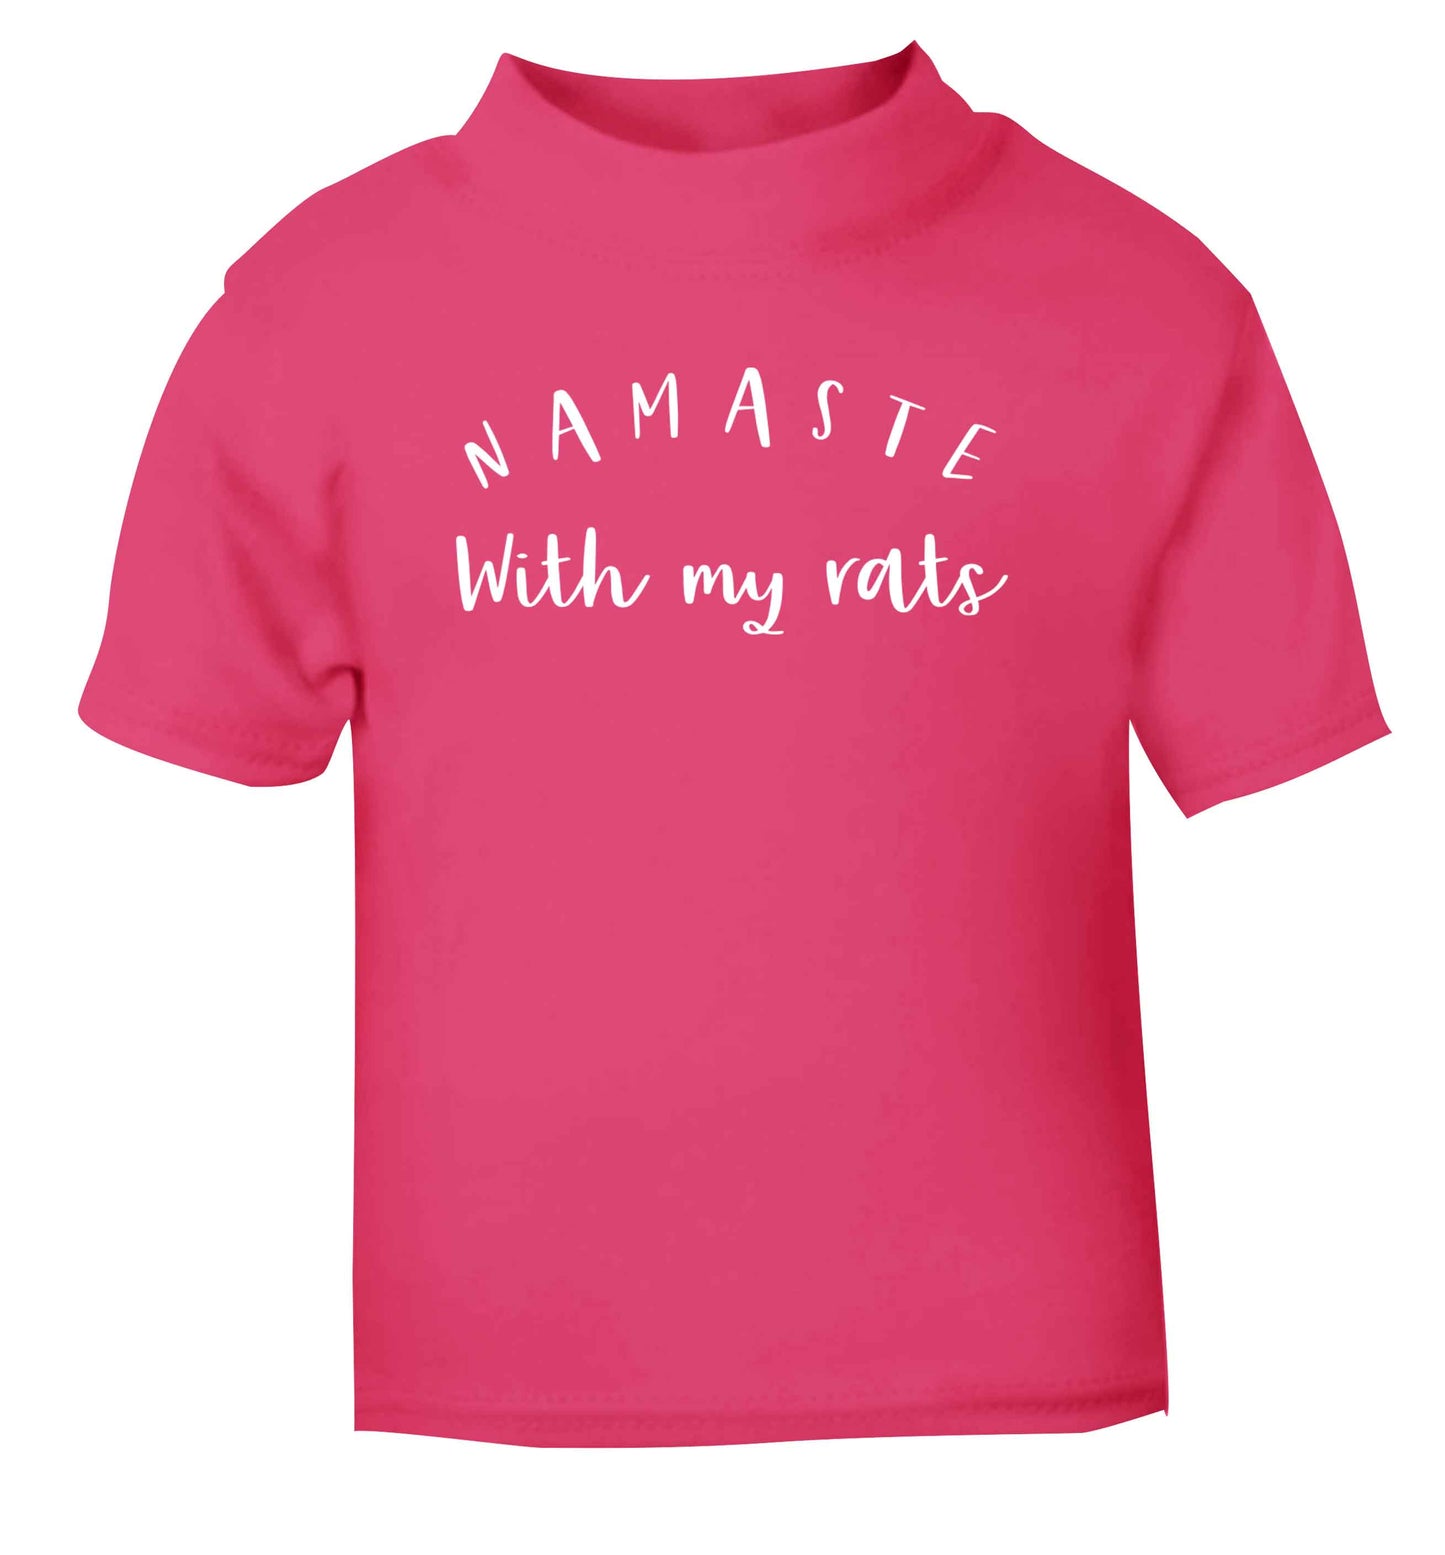 Namaste with my rats pink Baby Toddler Tshirt 2 Years